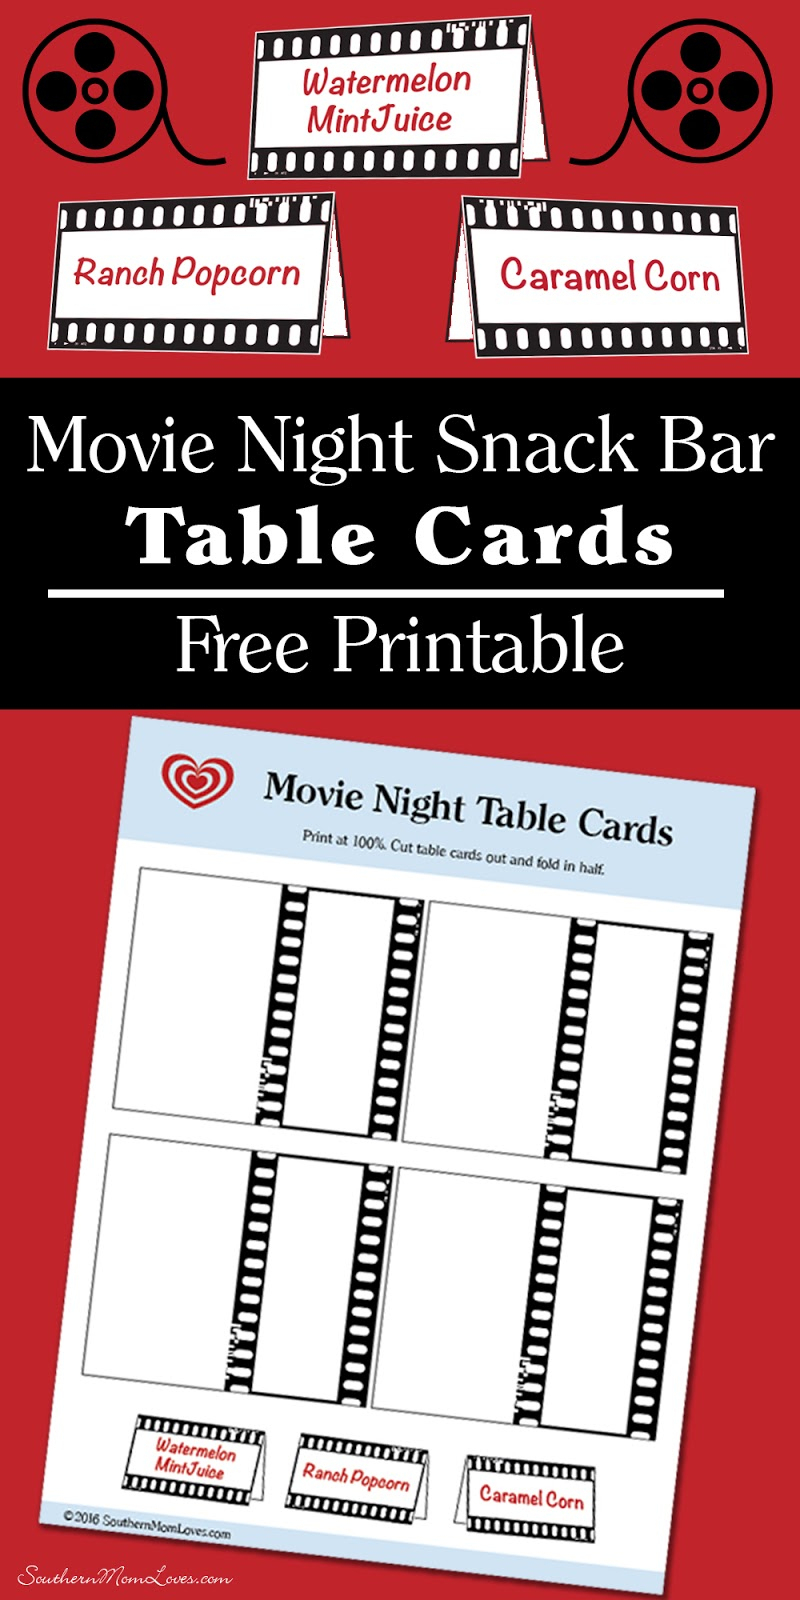 Southern Mom Loves: Movie Night Snack Bar Table Cards {Free Printable} - Free Concessions Printable